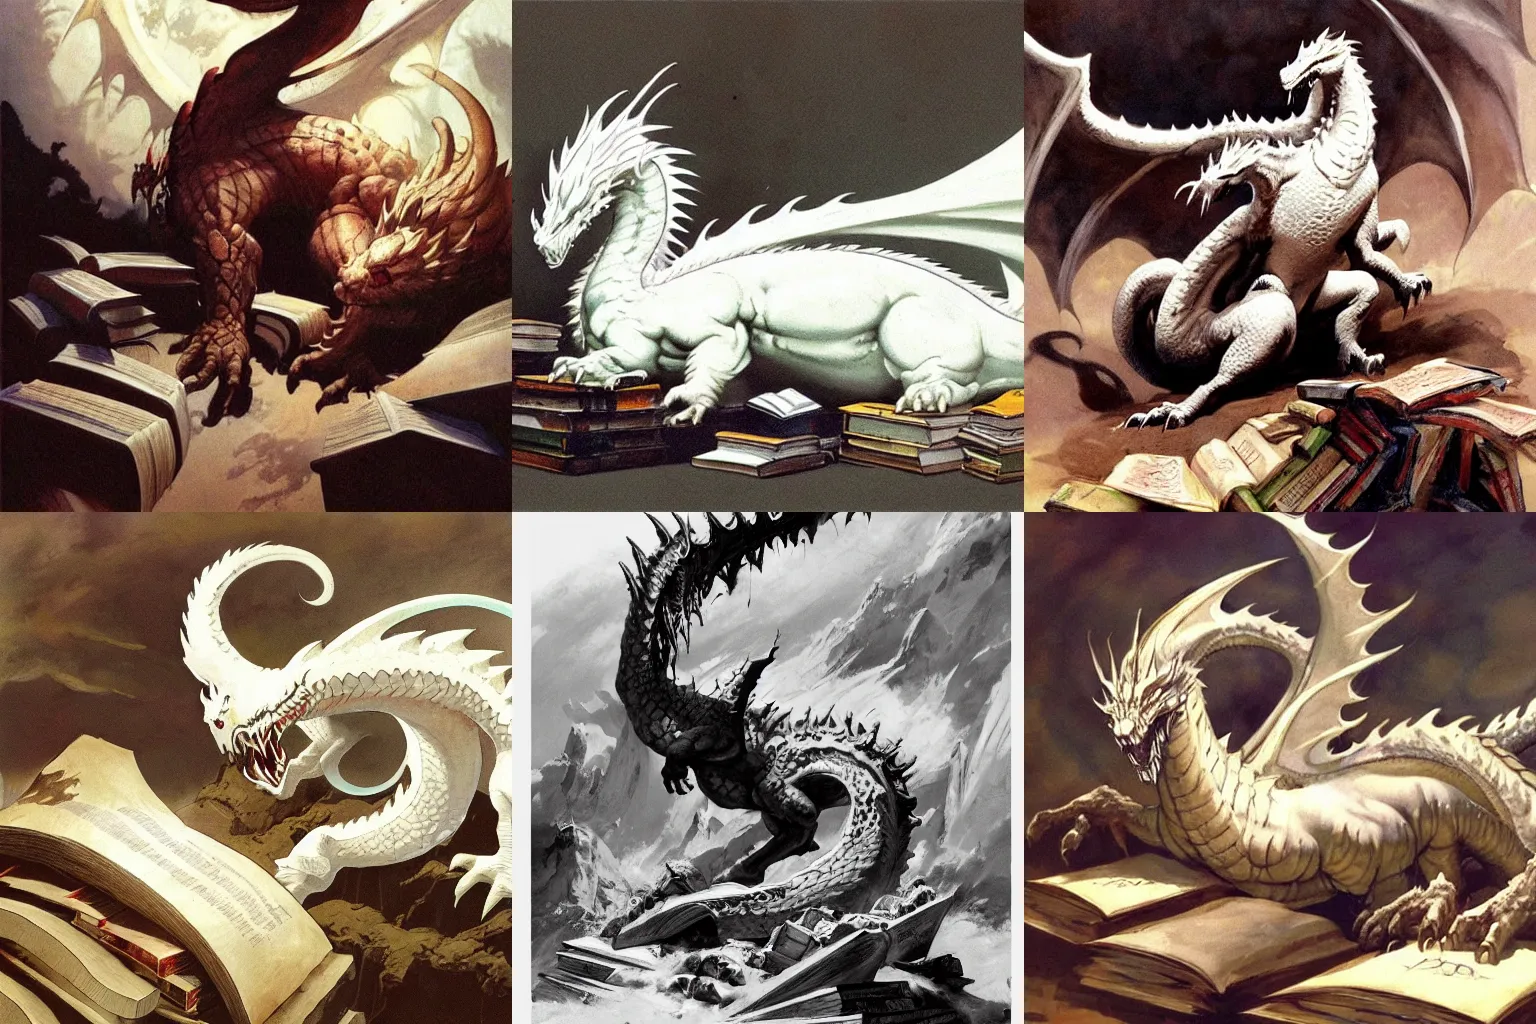 A huge white dragon sleeping on a hoard of books, by, Stable Diffusion